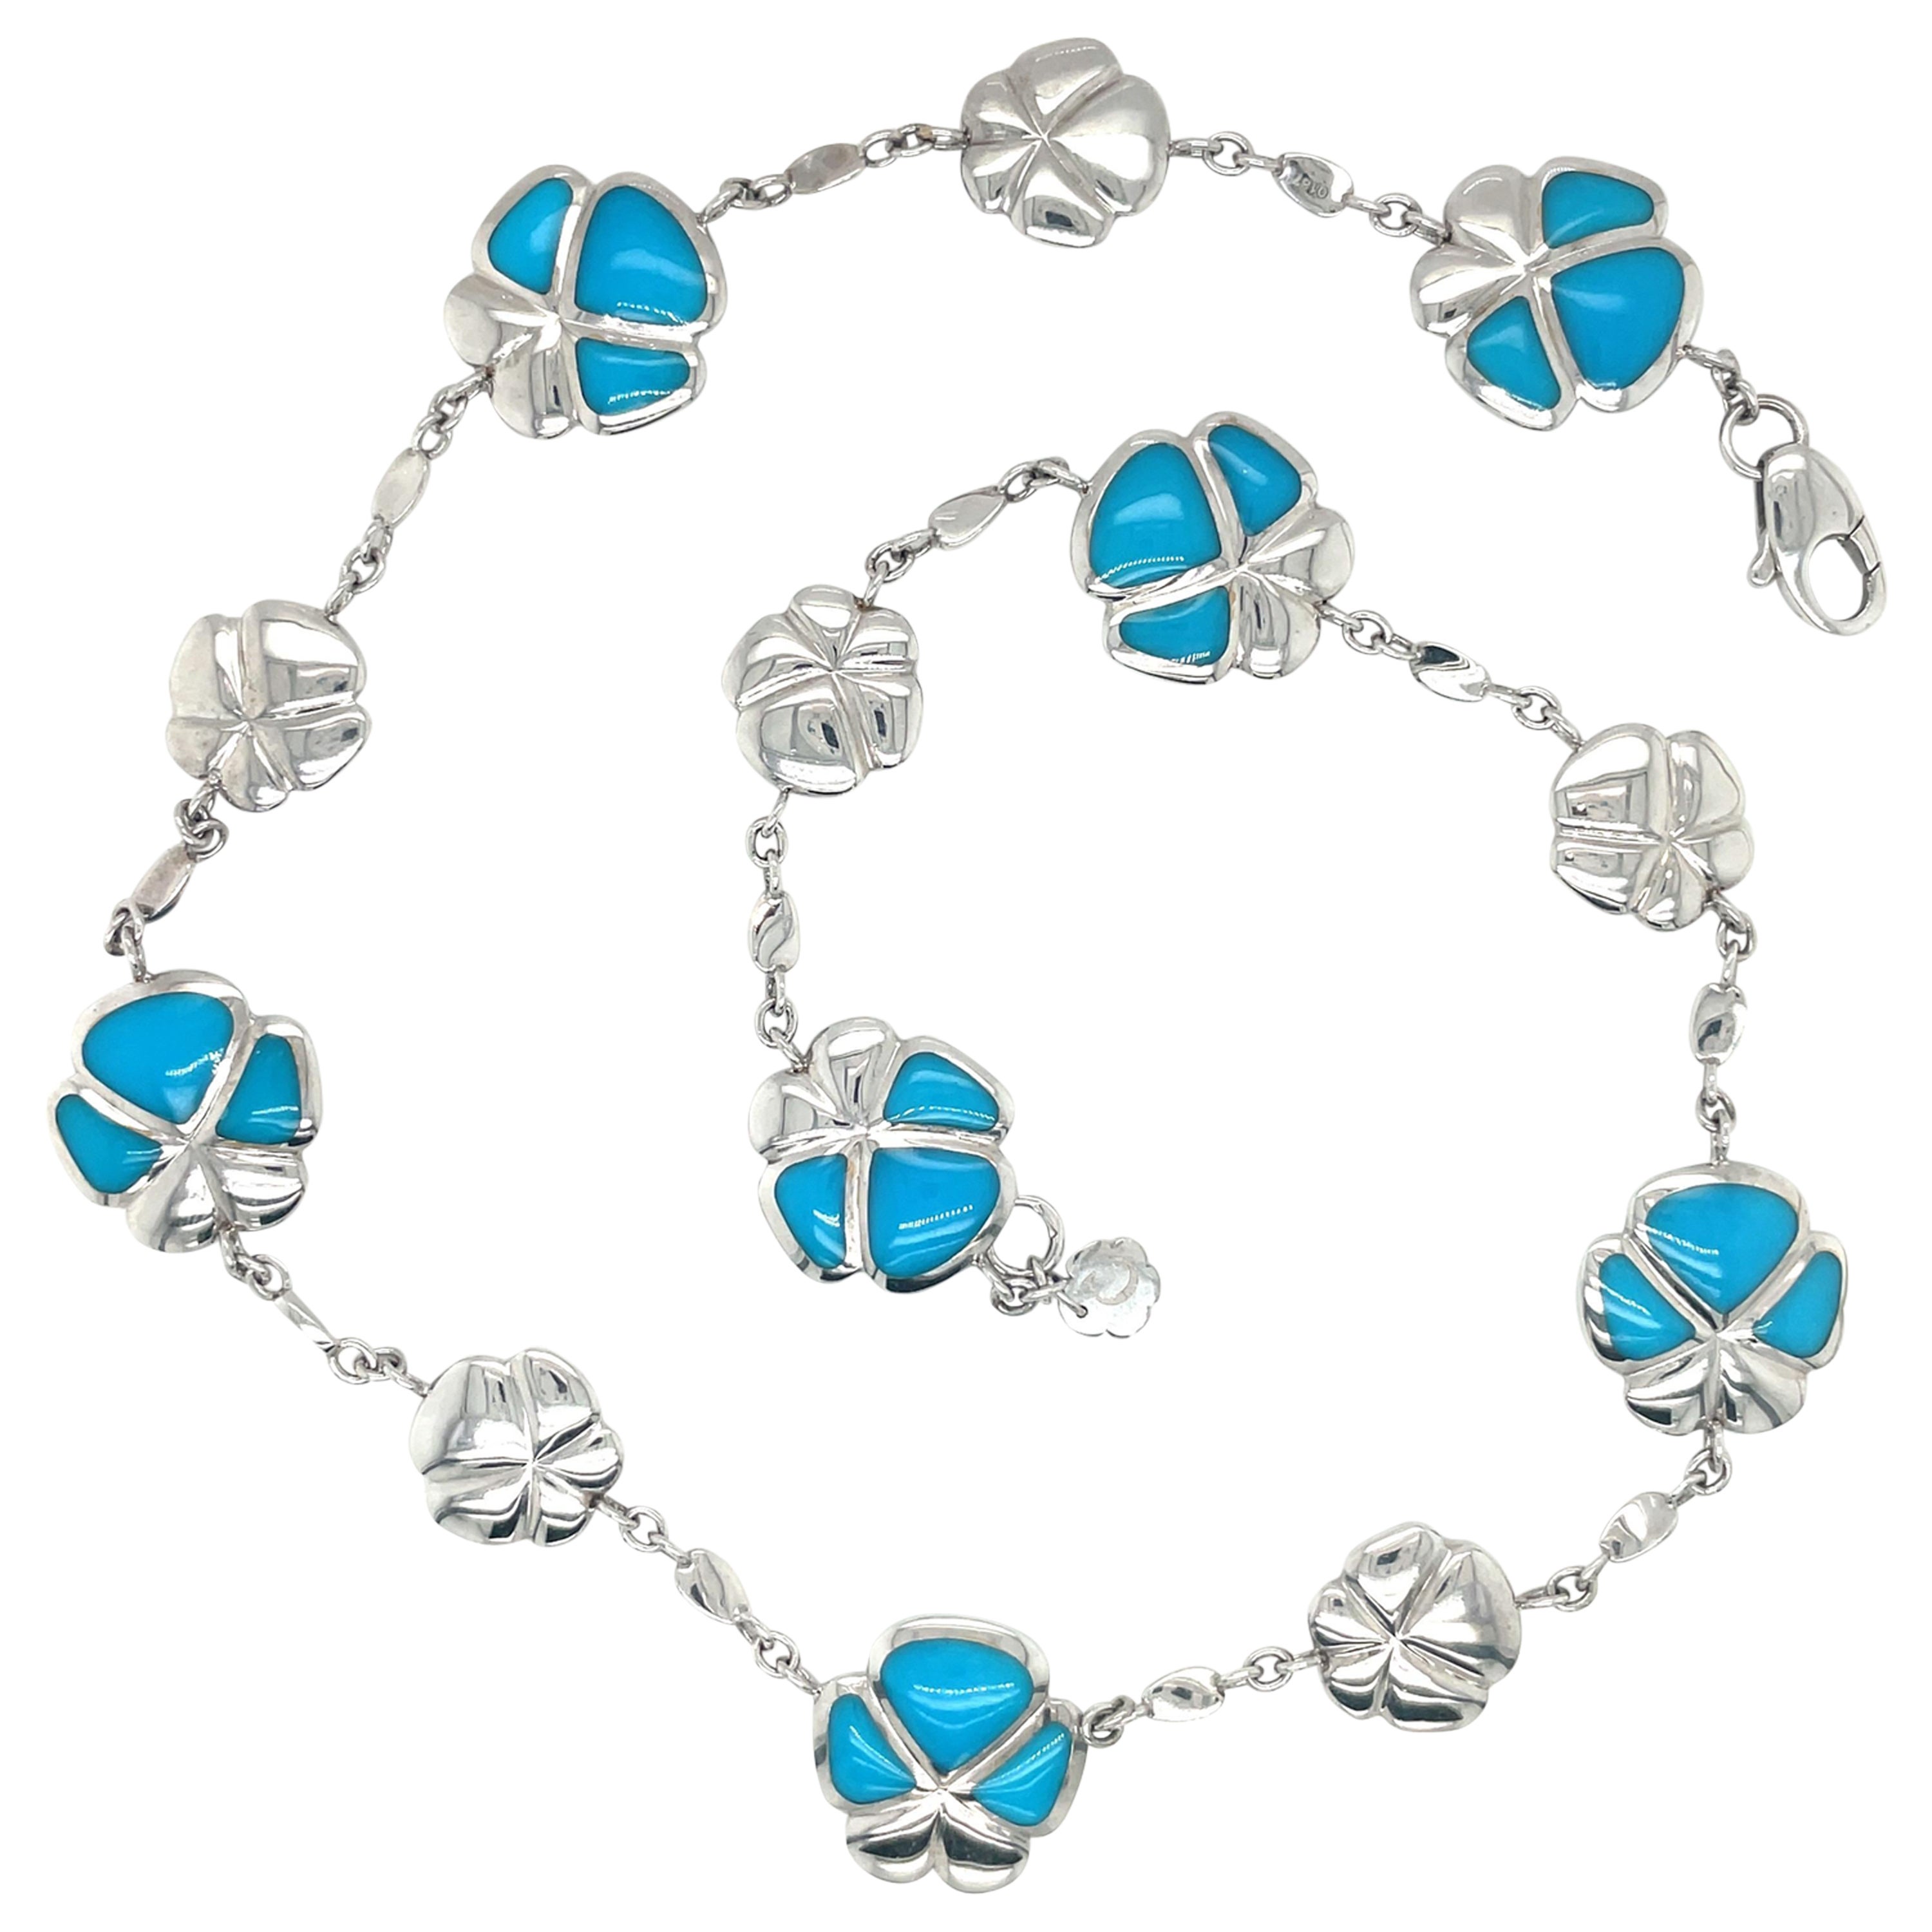 Amnbrosi 18KT White Gold & Turquoise Viola Flower Necklace